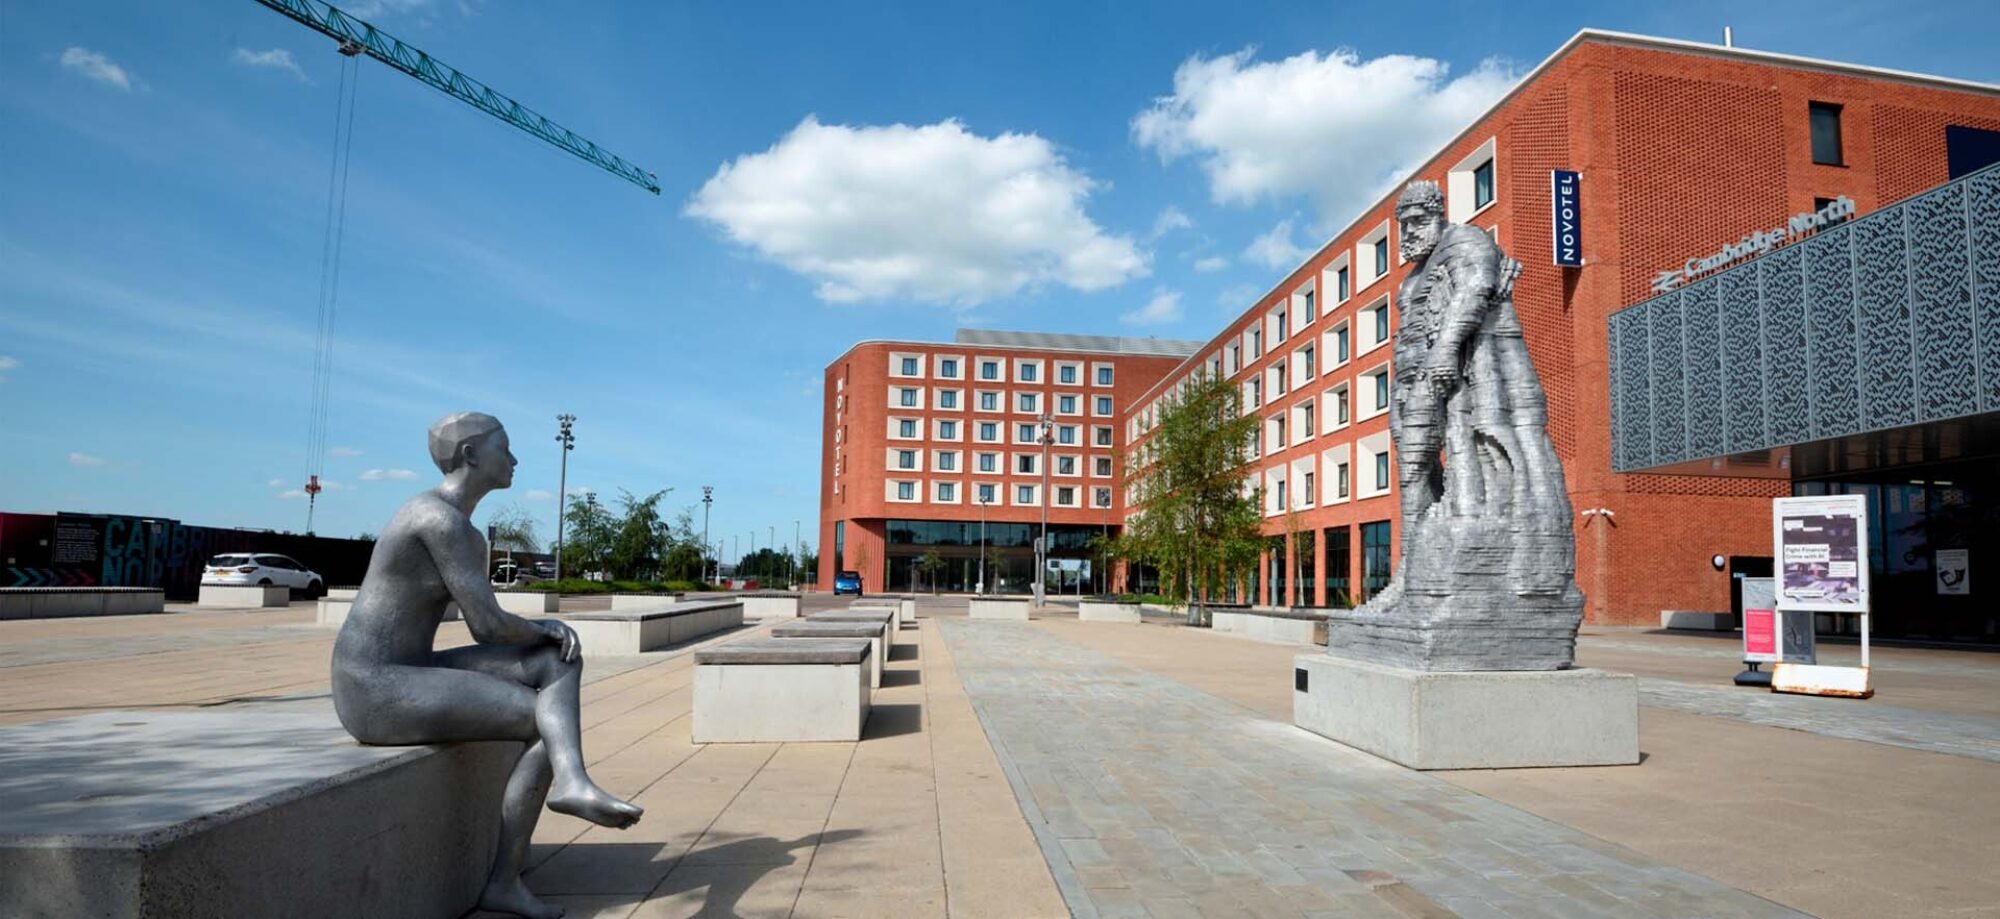 Cambridge Square and Novotel Hotel with 'Hercules Meets Galatea' sculptures in the foreground